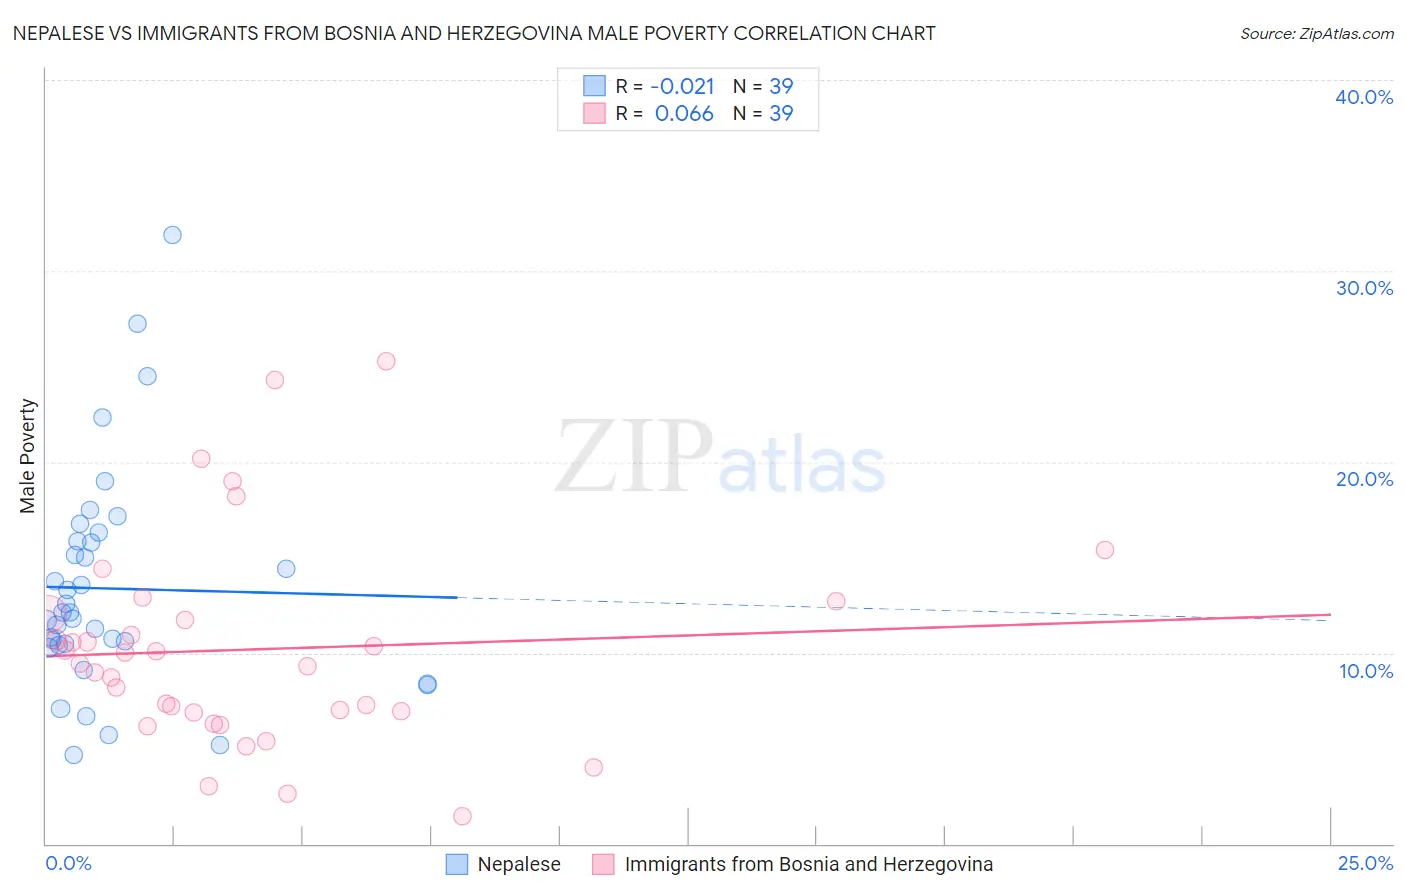 Nepalese vs Immigrants from Bosnia and Herzegovina Male Poverty